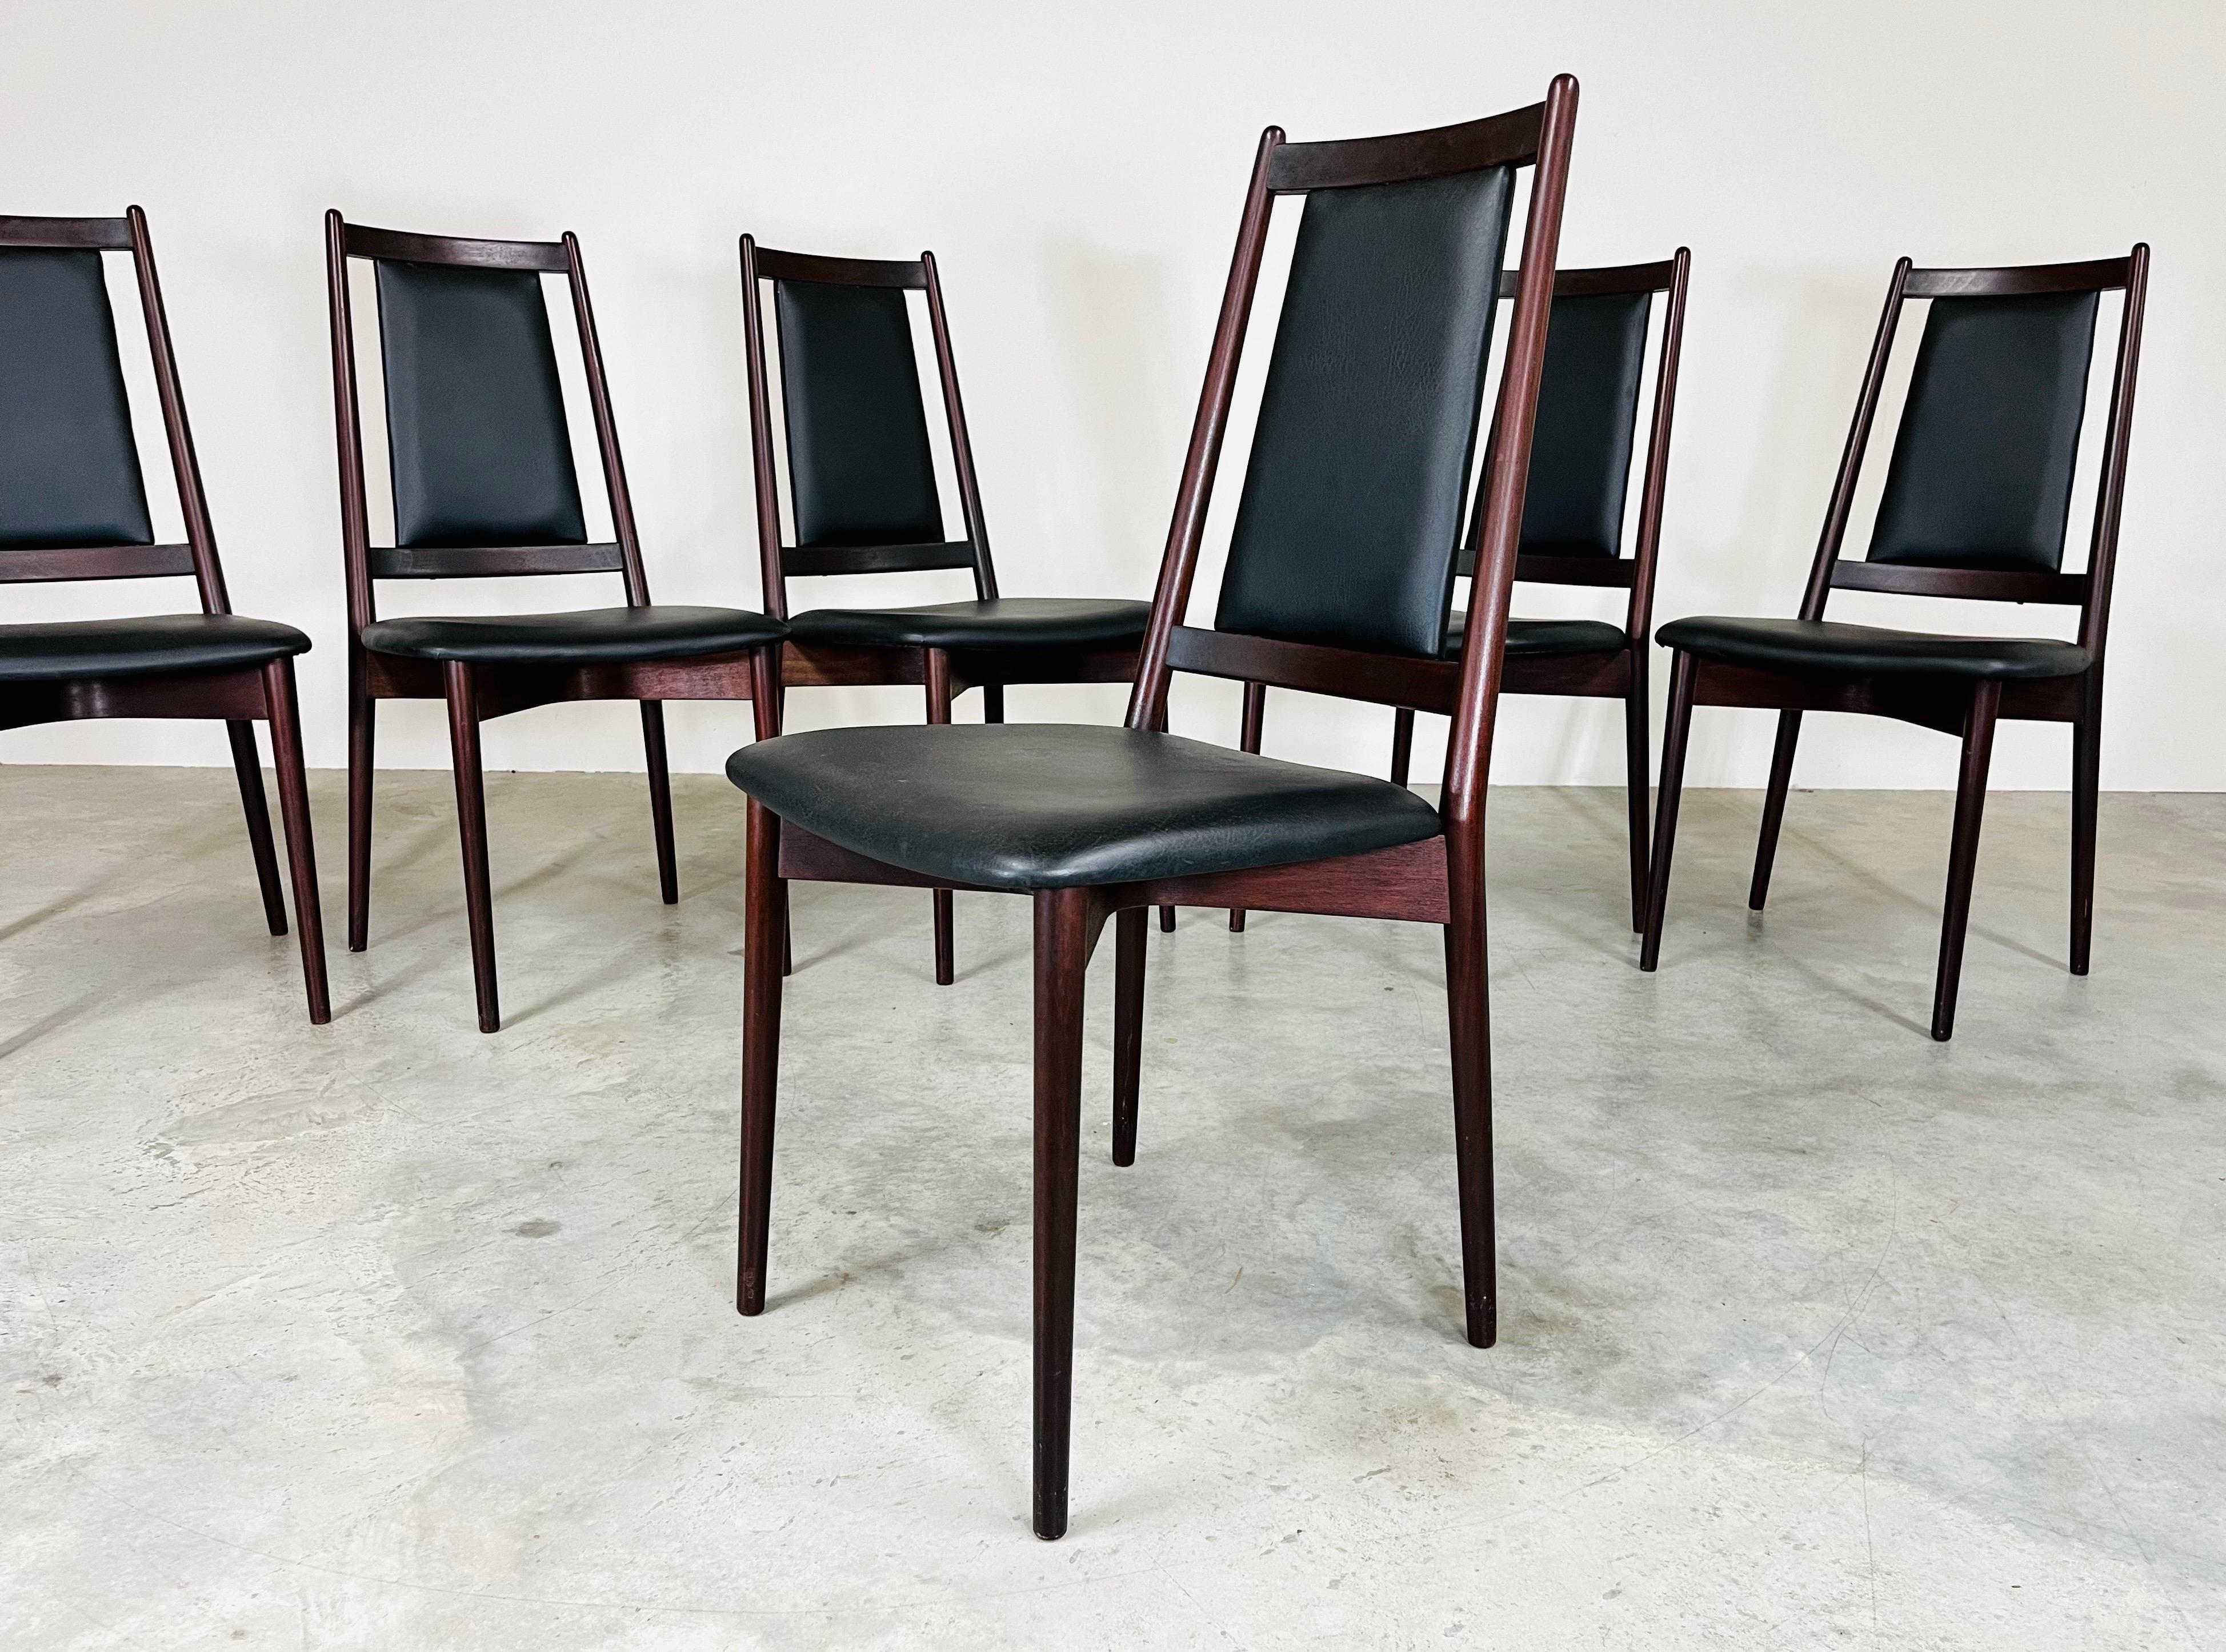 Late 20th Century Set of 6 Danish Modern Teak Dining Chairs After Johannes Andersen